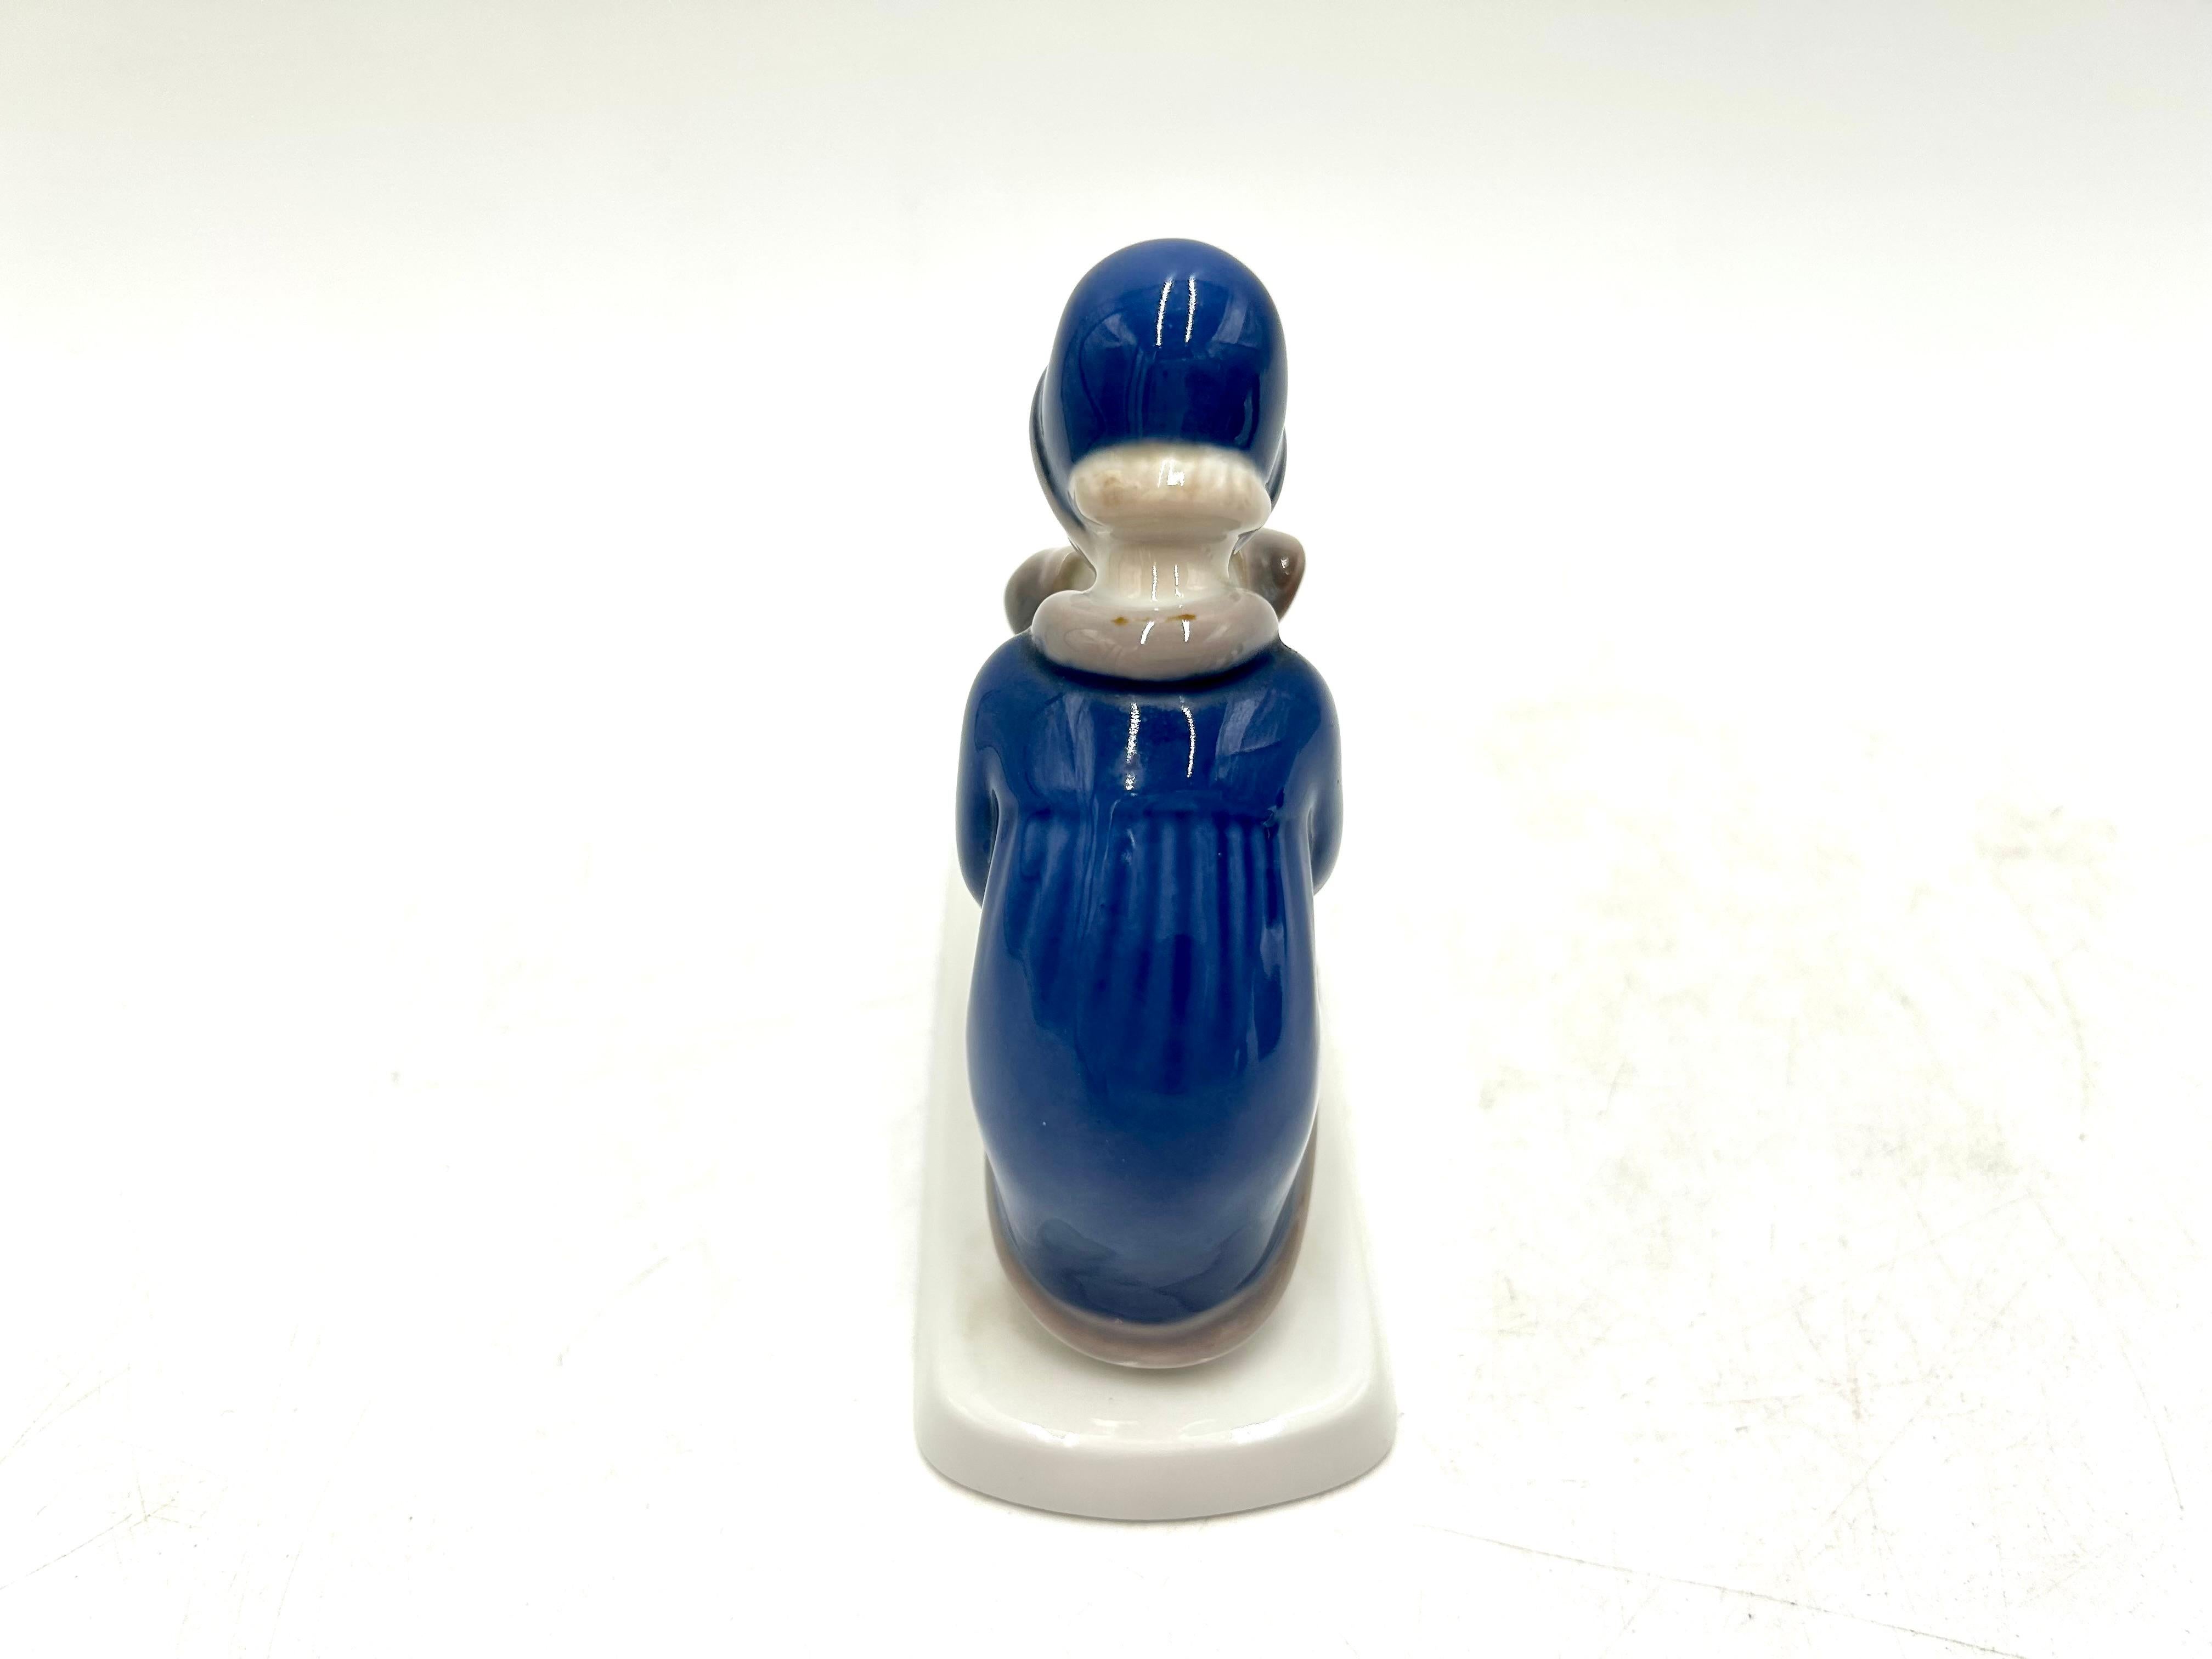 Porcelain figurine of a girl with a dog, made in Denmark by Bing & Grondahl, mark used in the 1950s.

Very good condition, no damage.

Measures: height 11 cm, width 11 cm, depth 5 cm.